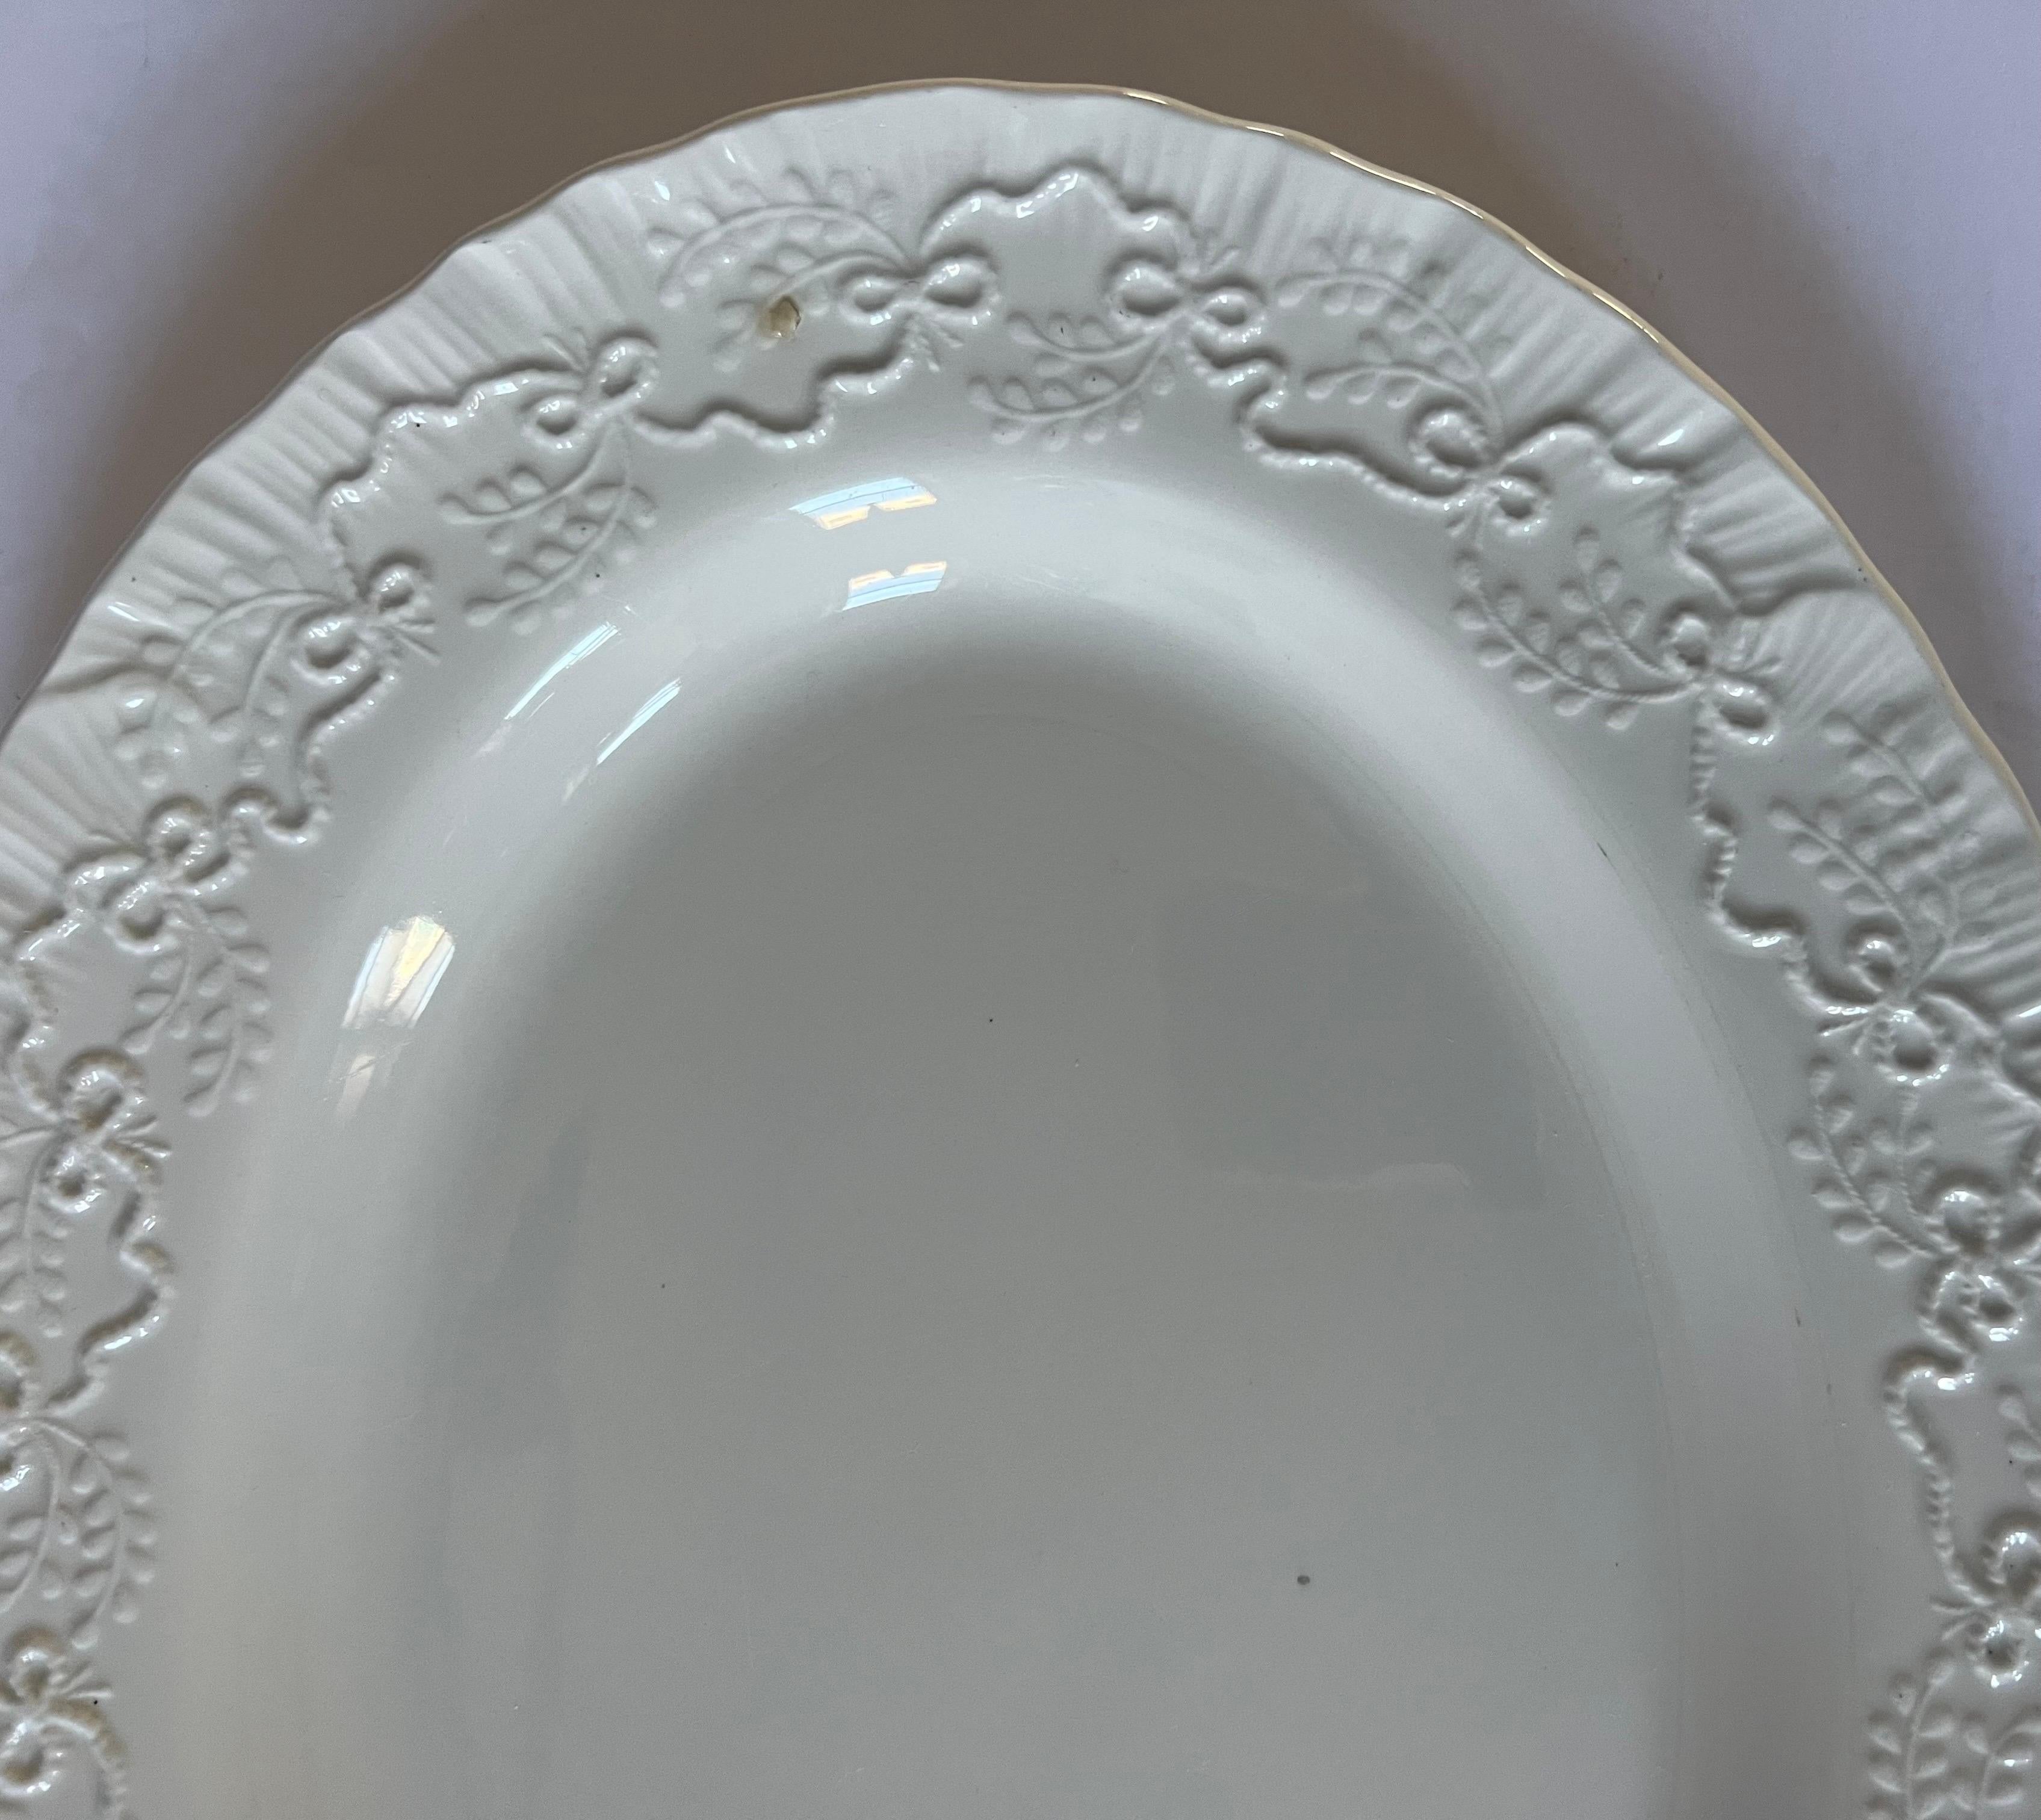 Oval serving platter in the Claire pattern by Wedgwood for Ralph Lauren Home.

Signed. Made in England, circa 1990.

Details:
*White china with an embossed design of ribbons complemented by a shell edge

*Pattern has been discontinued; actual